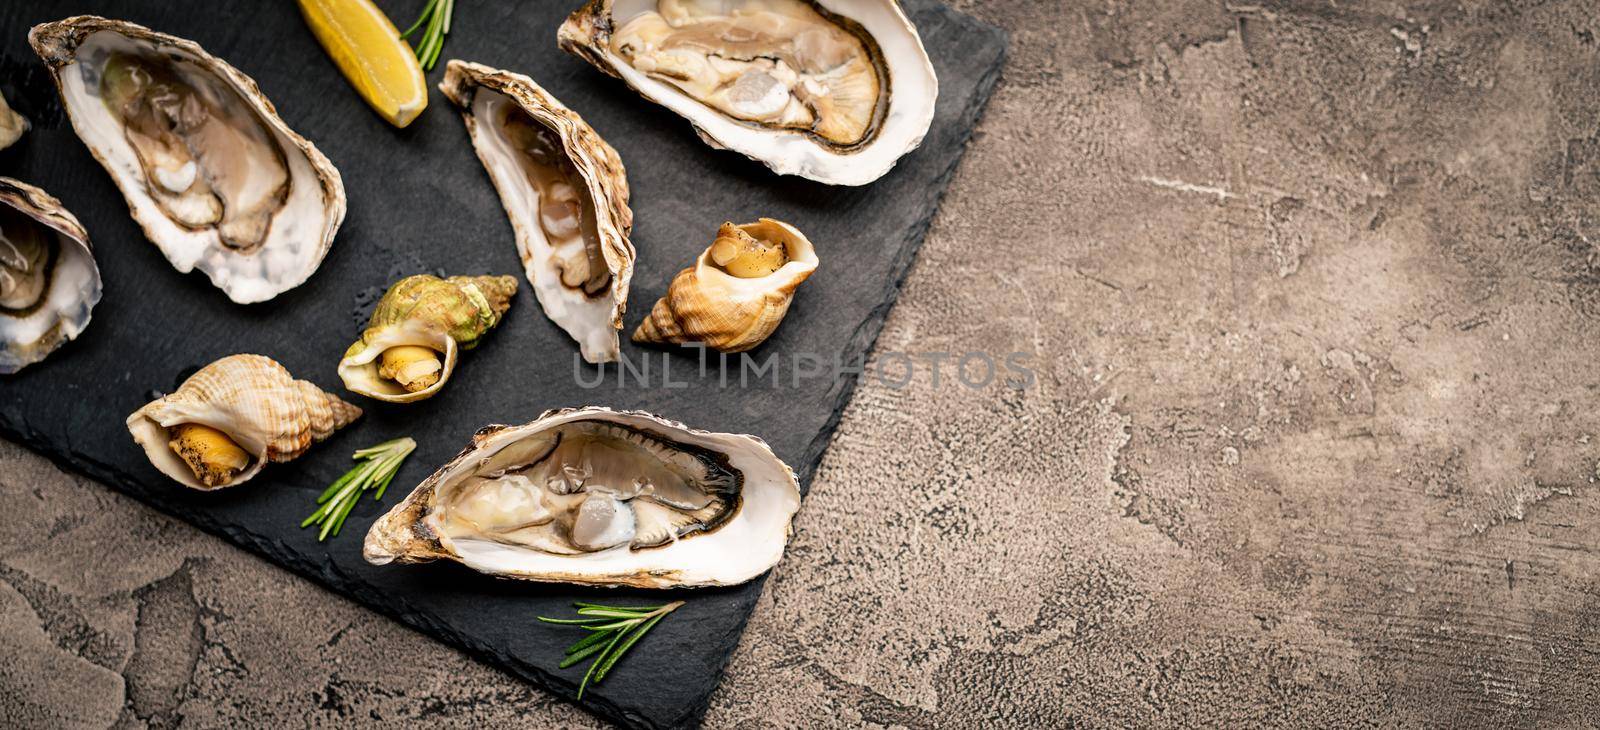 Set of oysters and snails on black platter. Luxury seafood delicatessen served with lemon and rosmarine